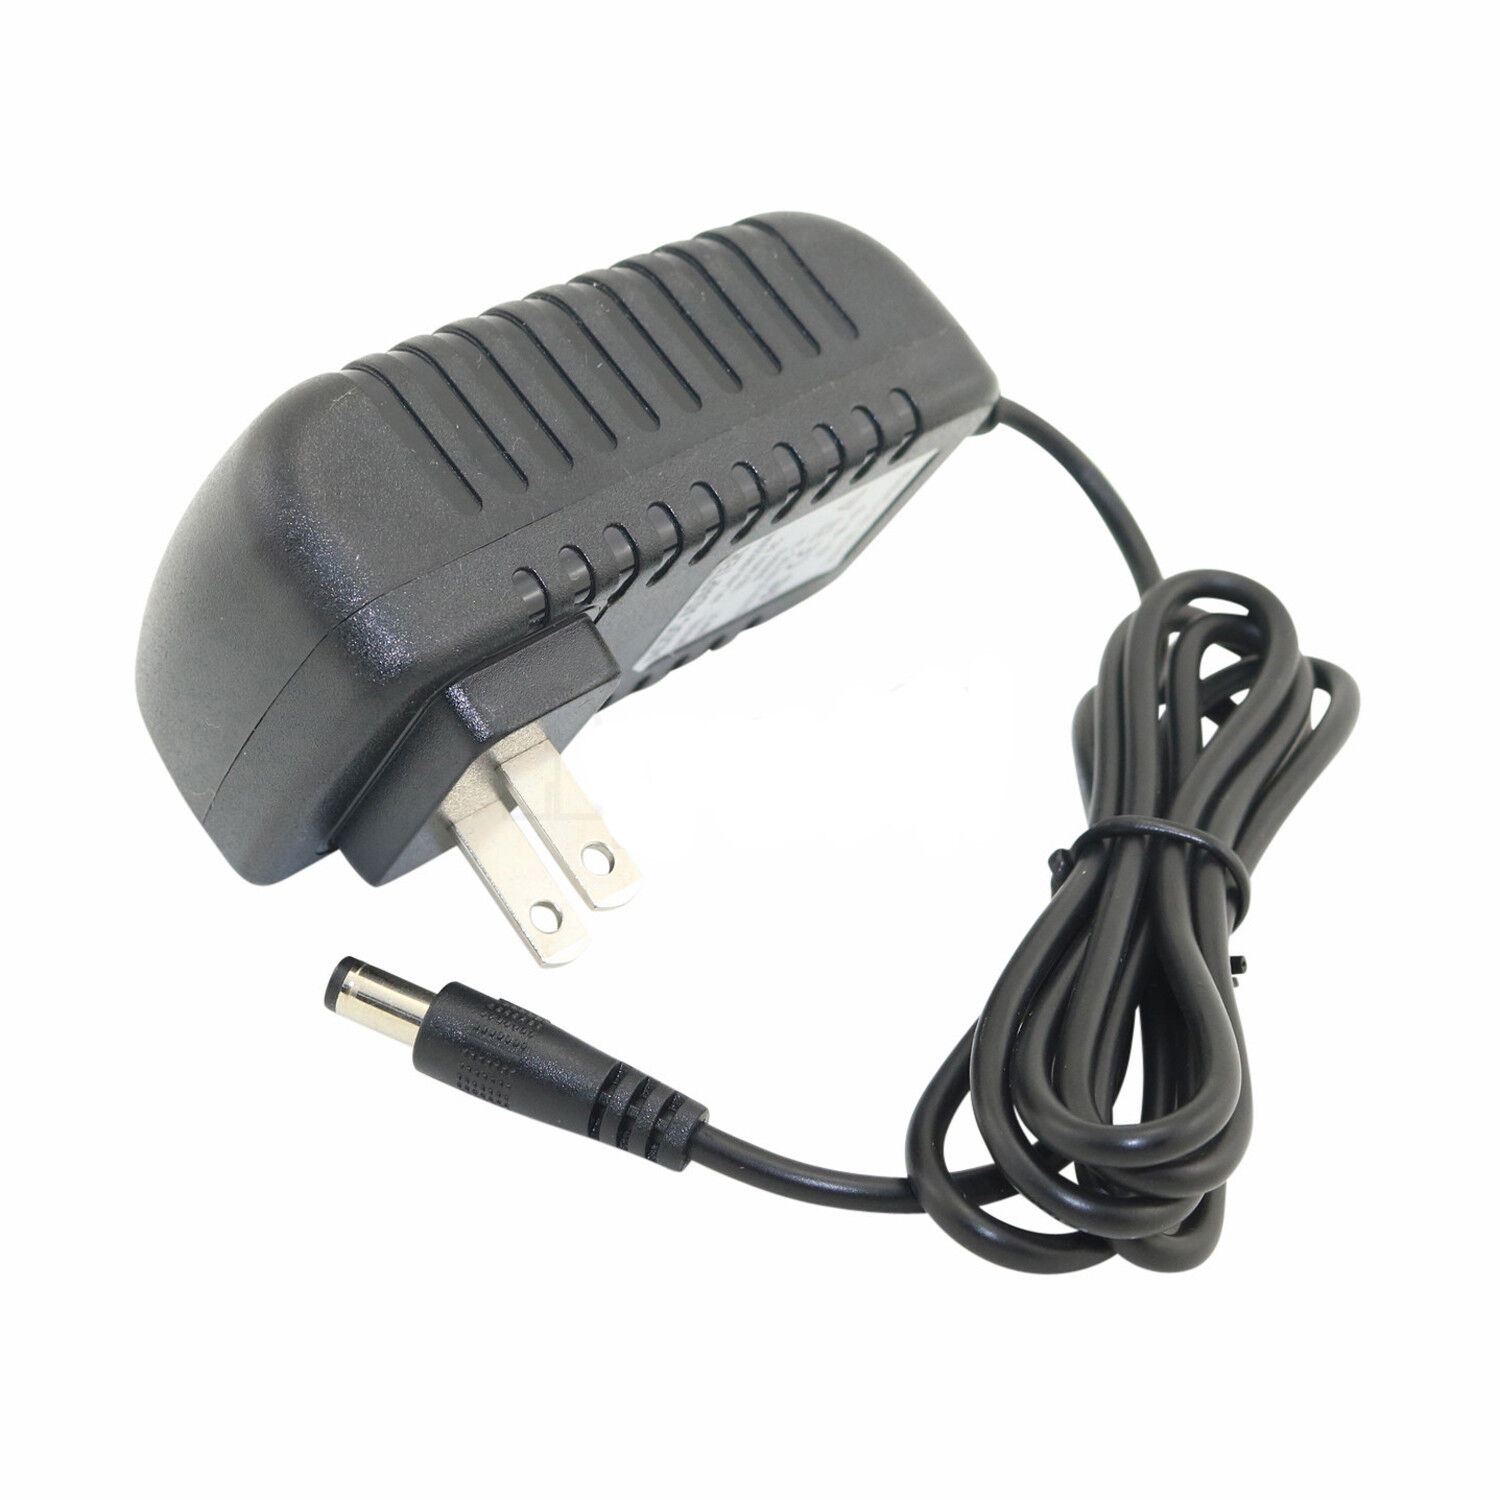 AC Adapter Compatible with Nintendo NES Game Console MW41-0900800A 7-38012-24010-6 NES-001 NES-002 NES-101 Power Supply